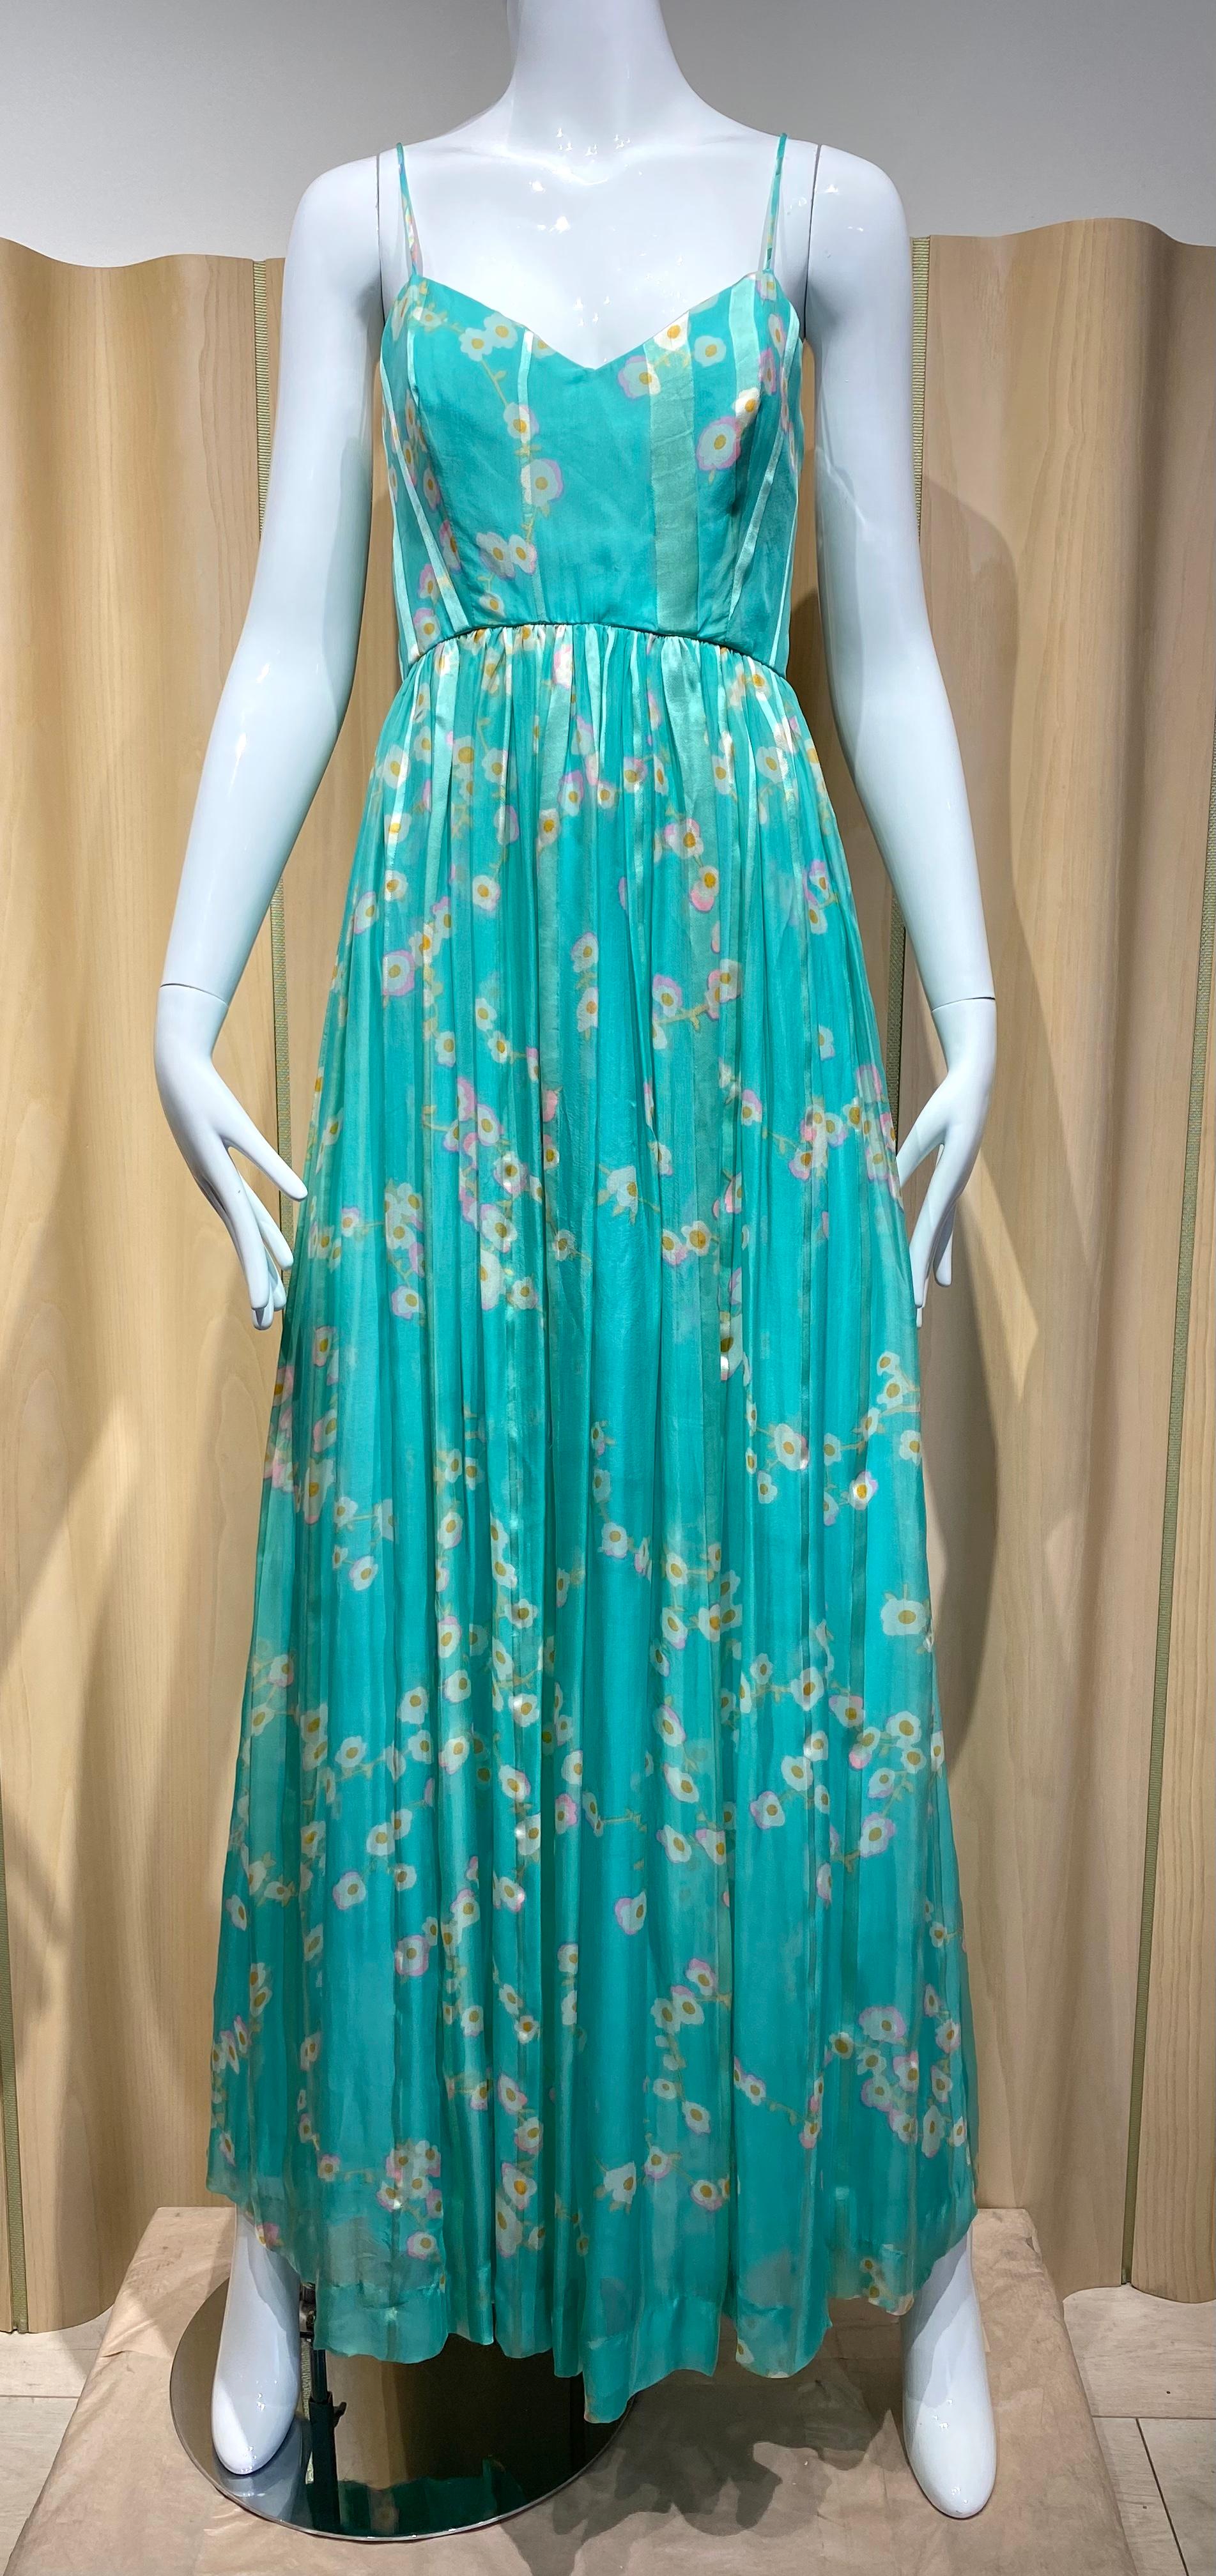 1960s Geoffrey Beene turquoise green floral print silk dress with spaghetti straps.
Size : 4
Measurement:
Bust ; 34” / Waist empire : 25” / Dress length: 58”